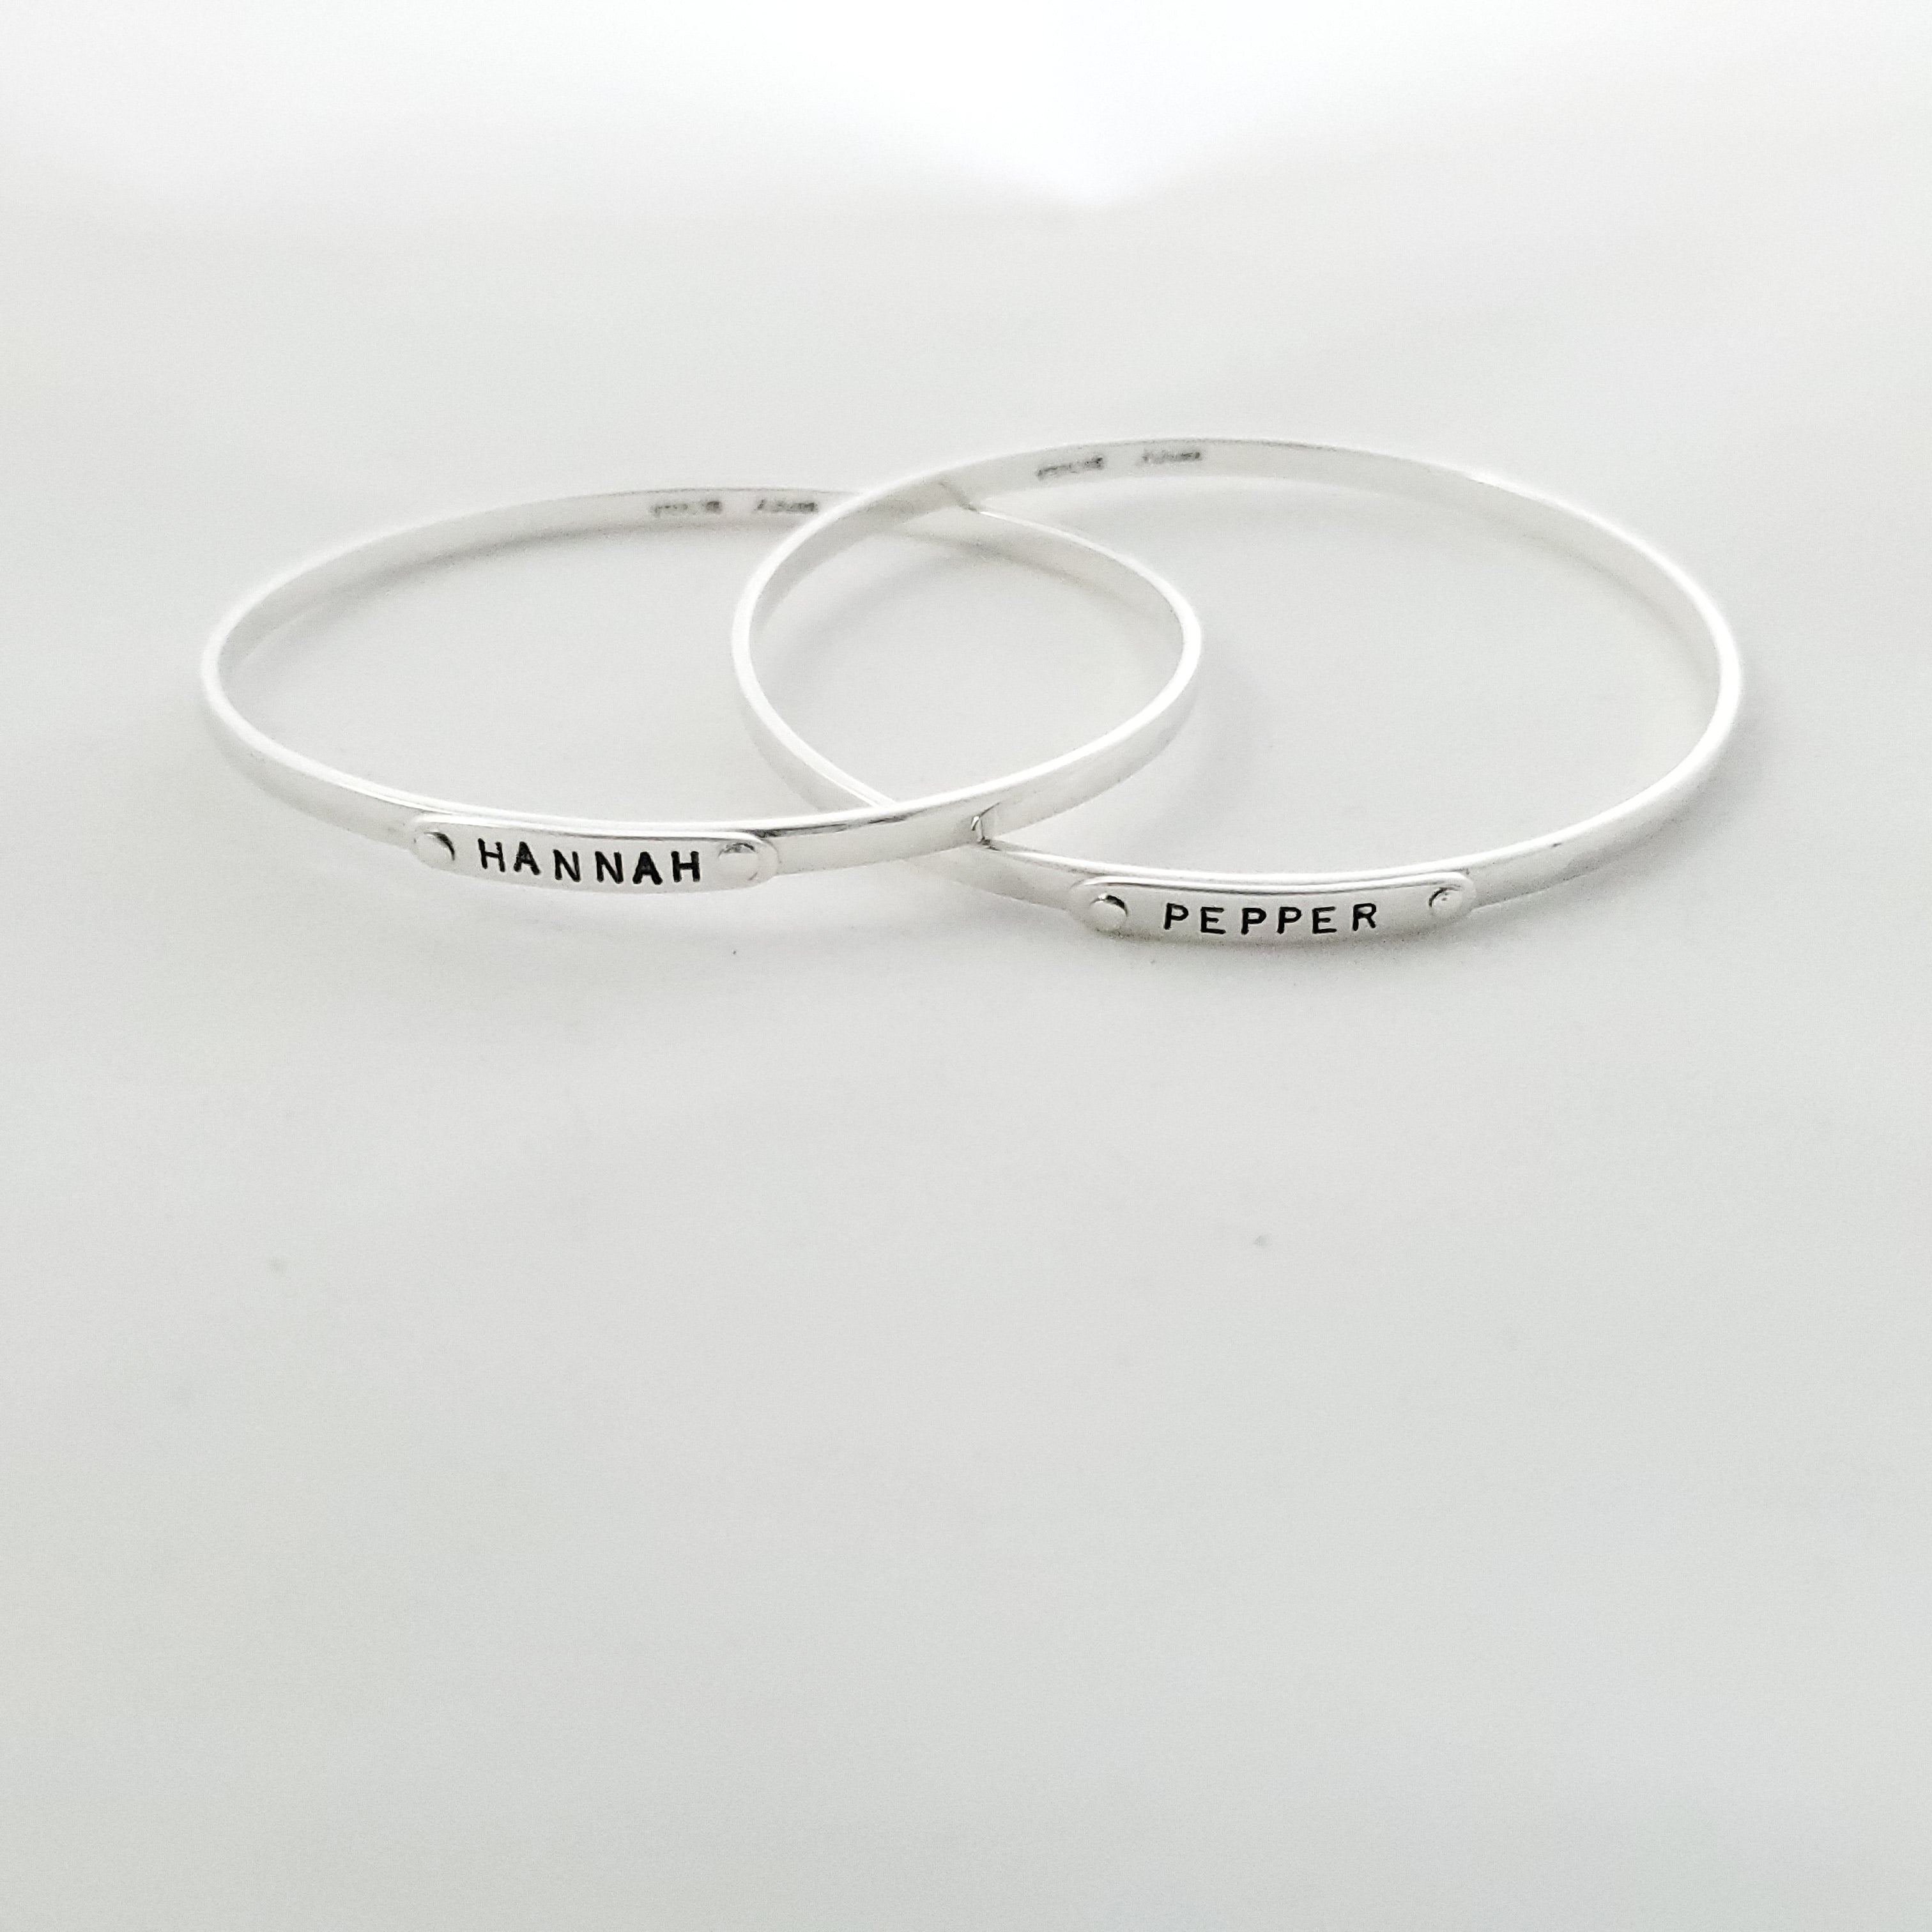 Two silver bangle bracelets shown spread apart but connected. One says HANNAH, the other says PEPPER.